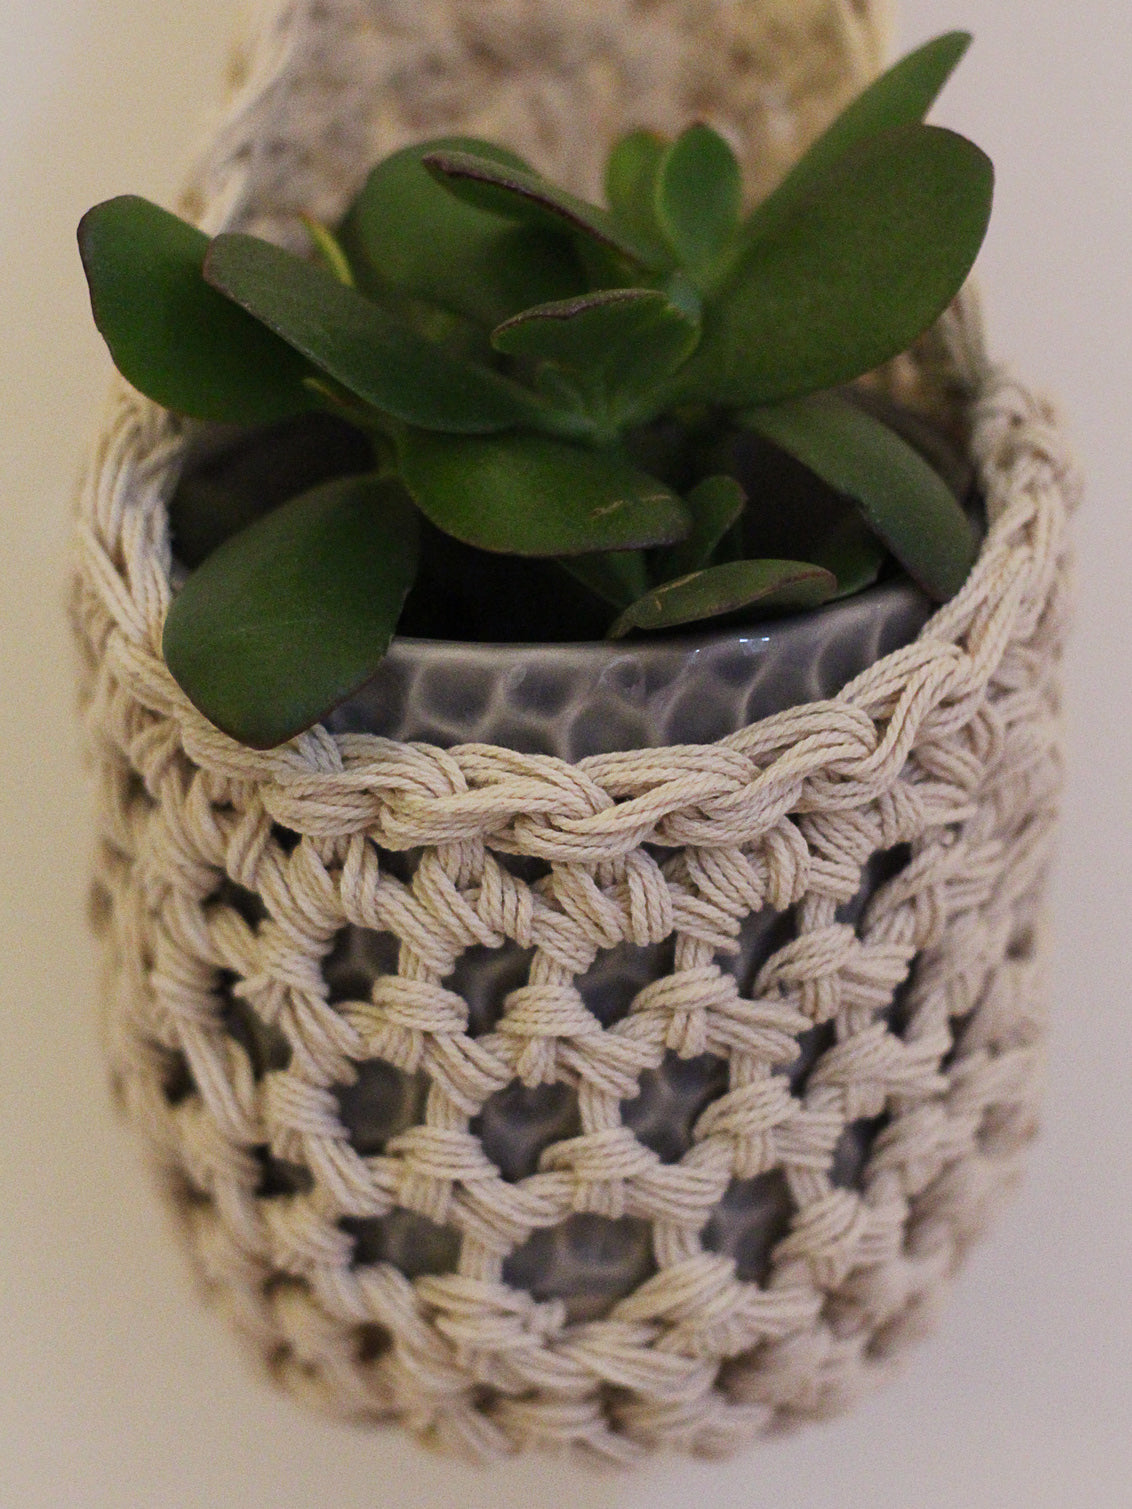 Image showing close rochet details of tierdrop shape cotton plant hanger, containing pot and plant. To give an idea of how the planter would look in situ.